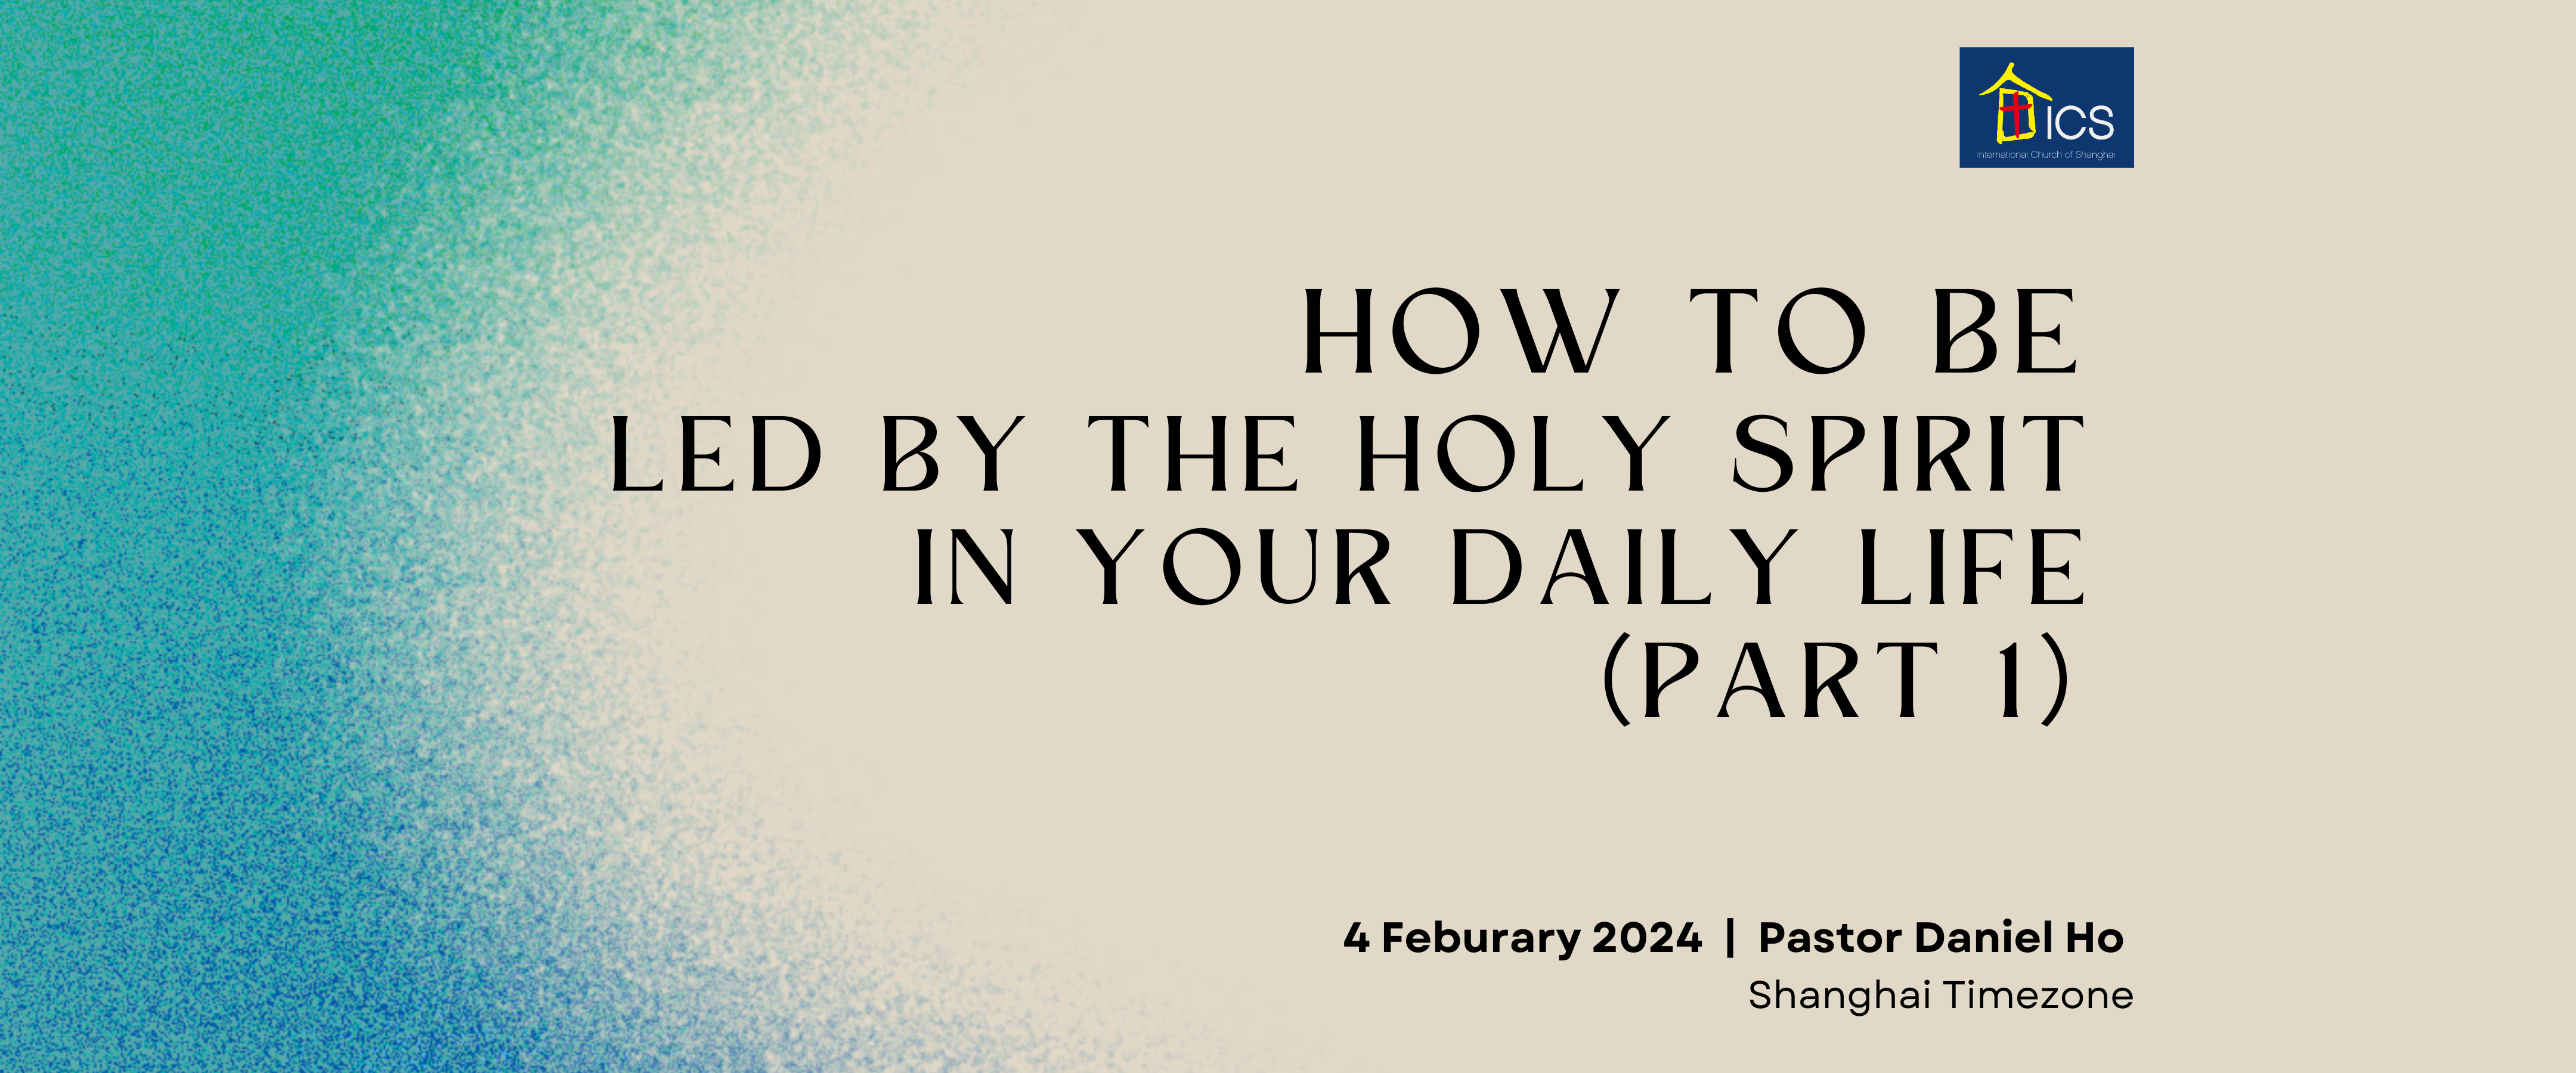 How to Be Led by the Holy Spirit in Your Daily Life?